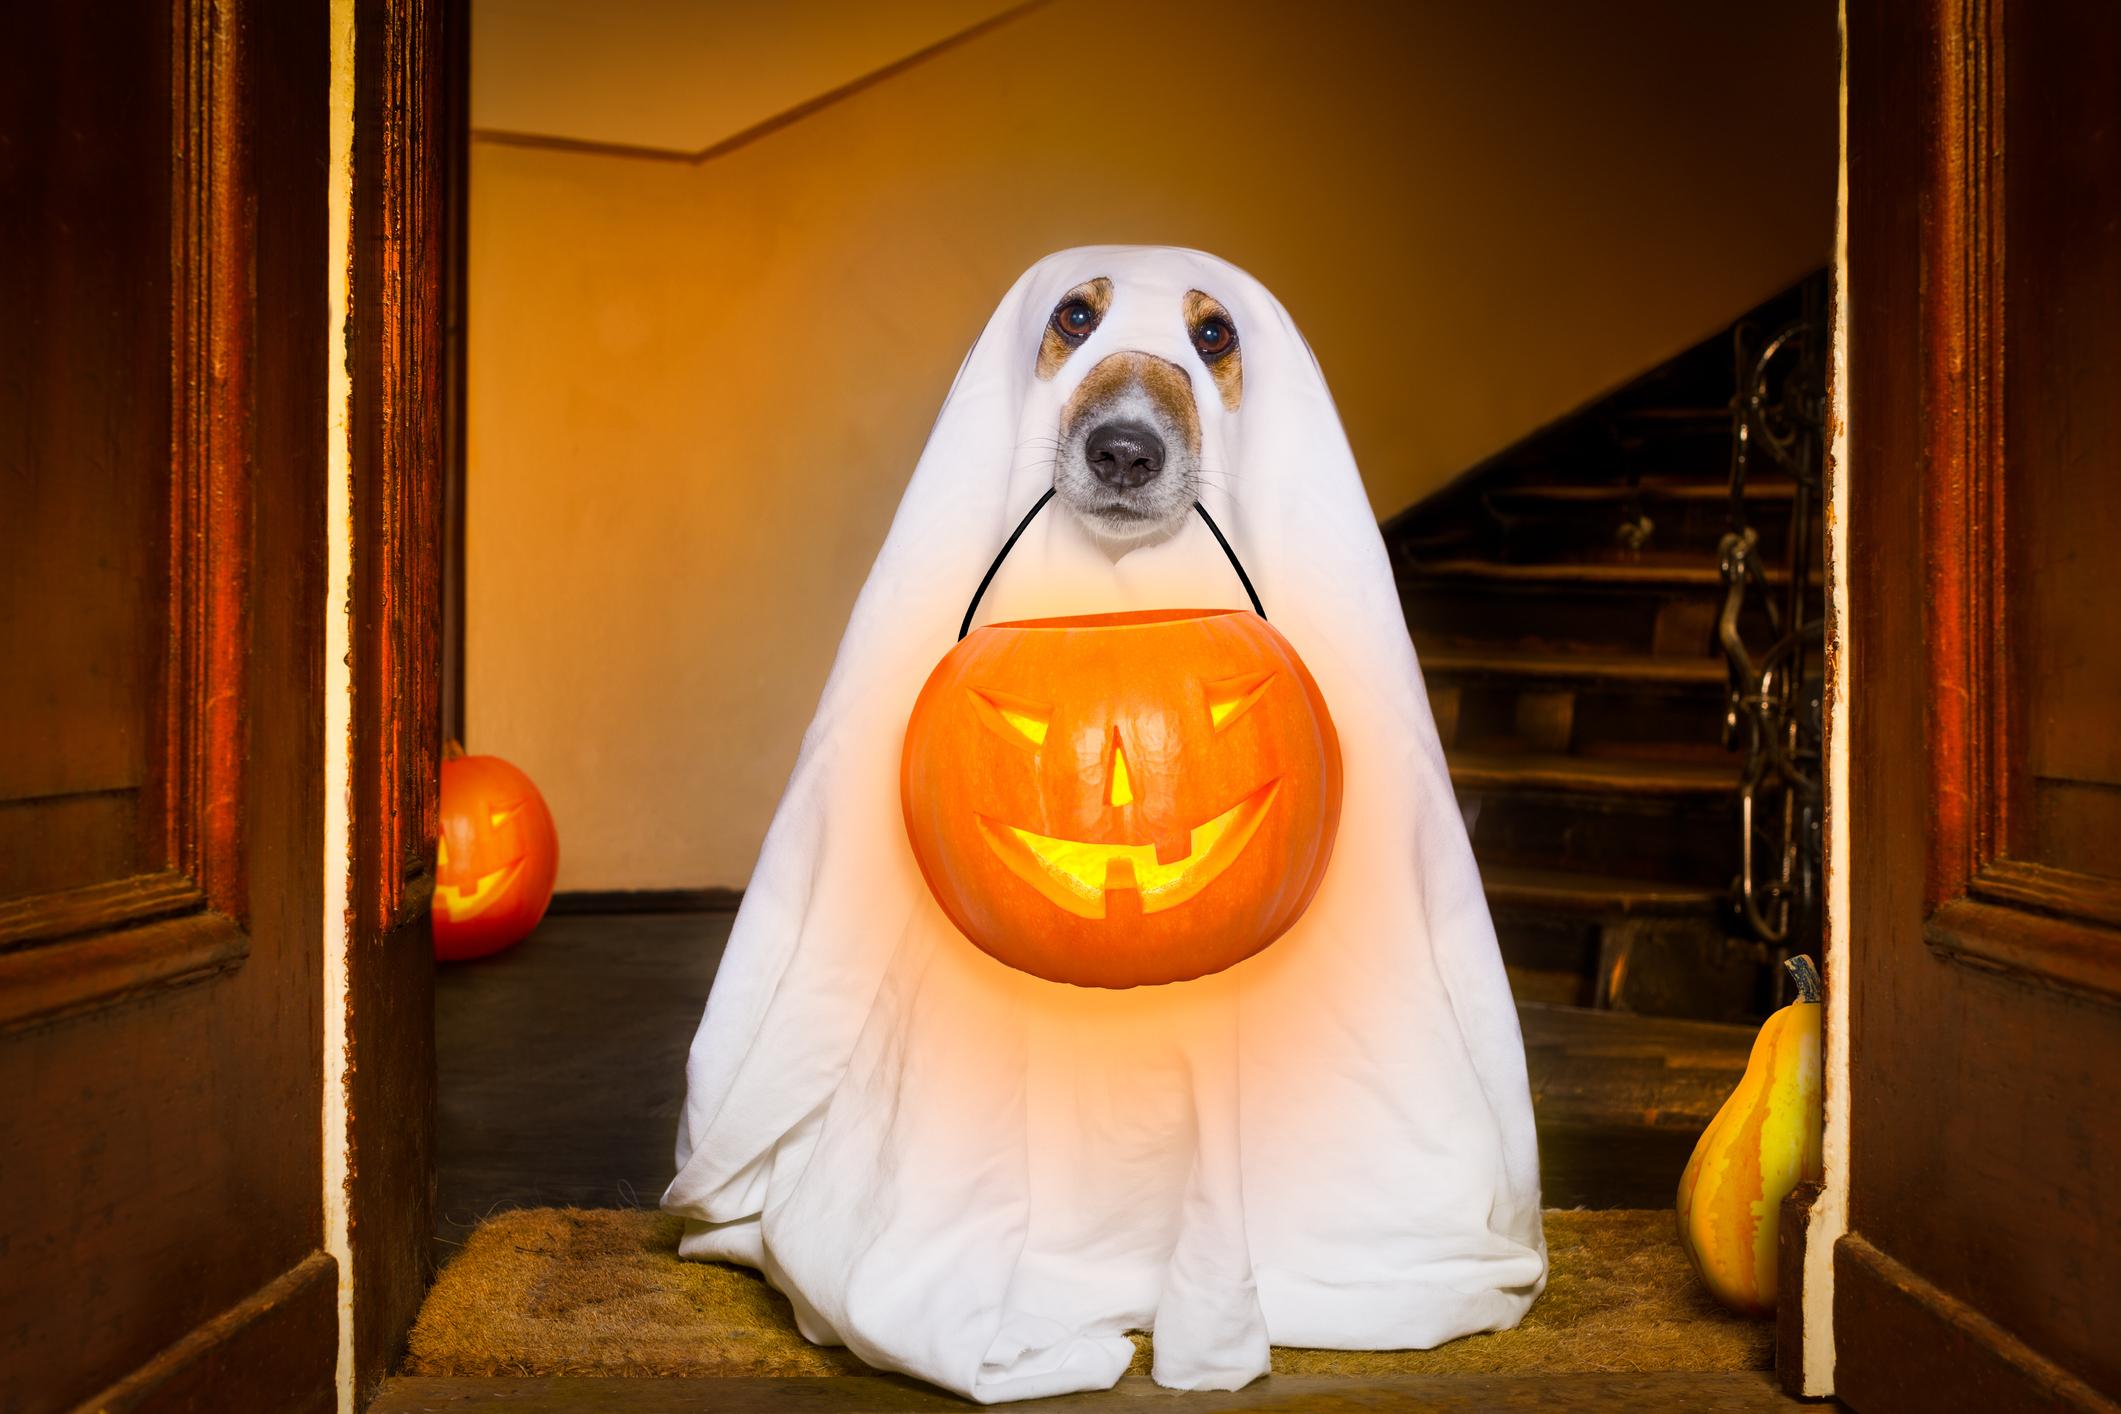 10 best dog costumes to dress up your pooch for Halloween | indy100